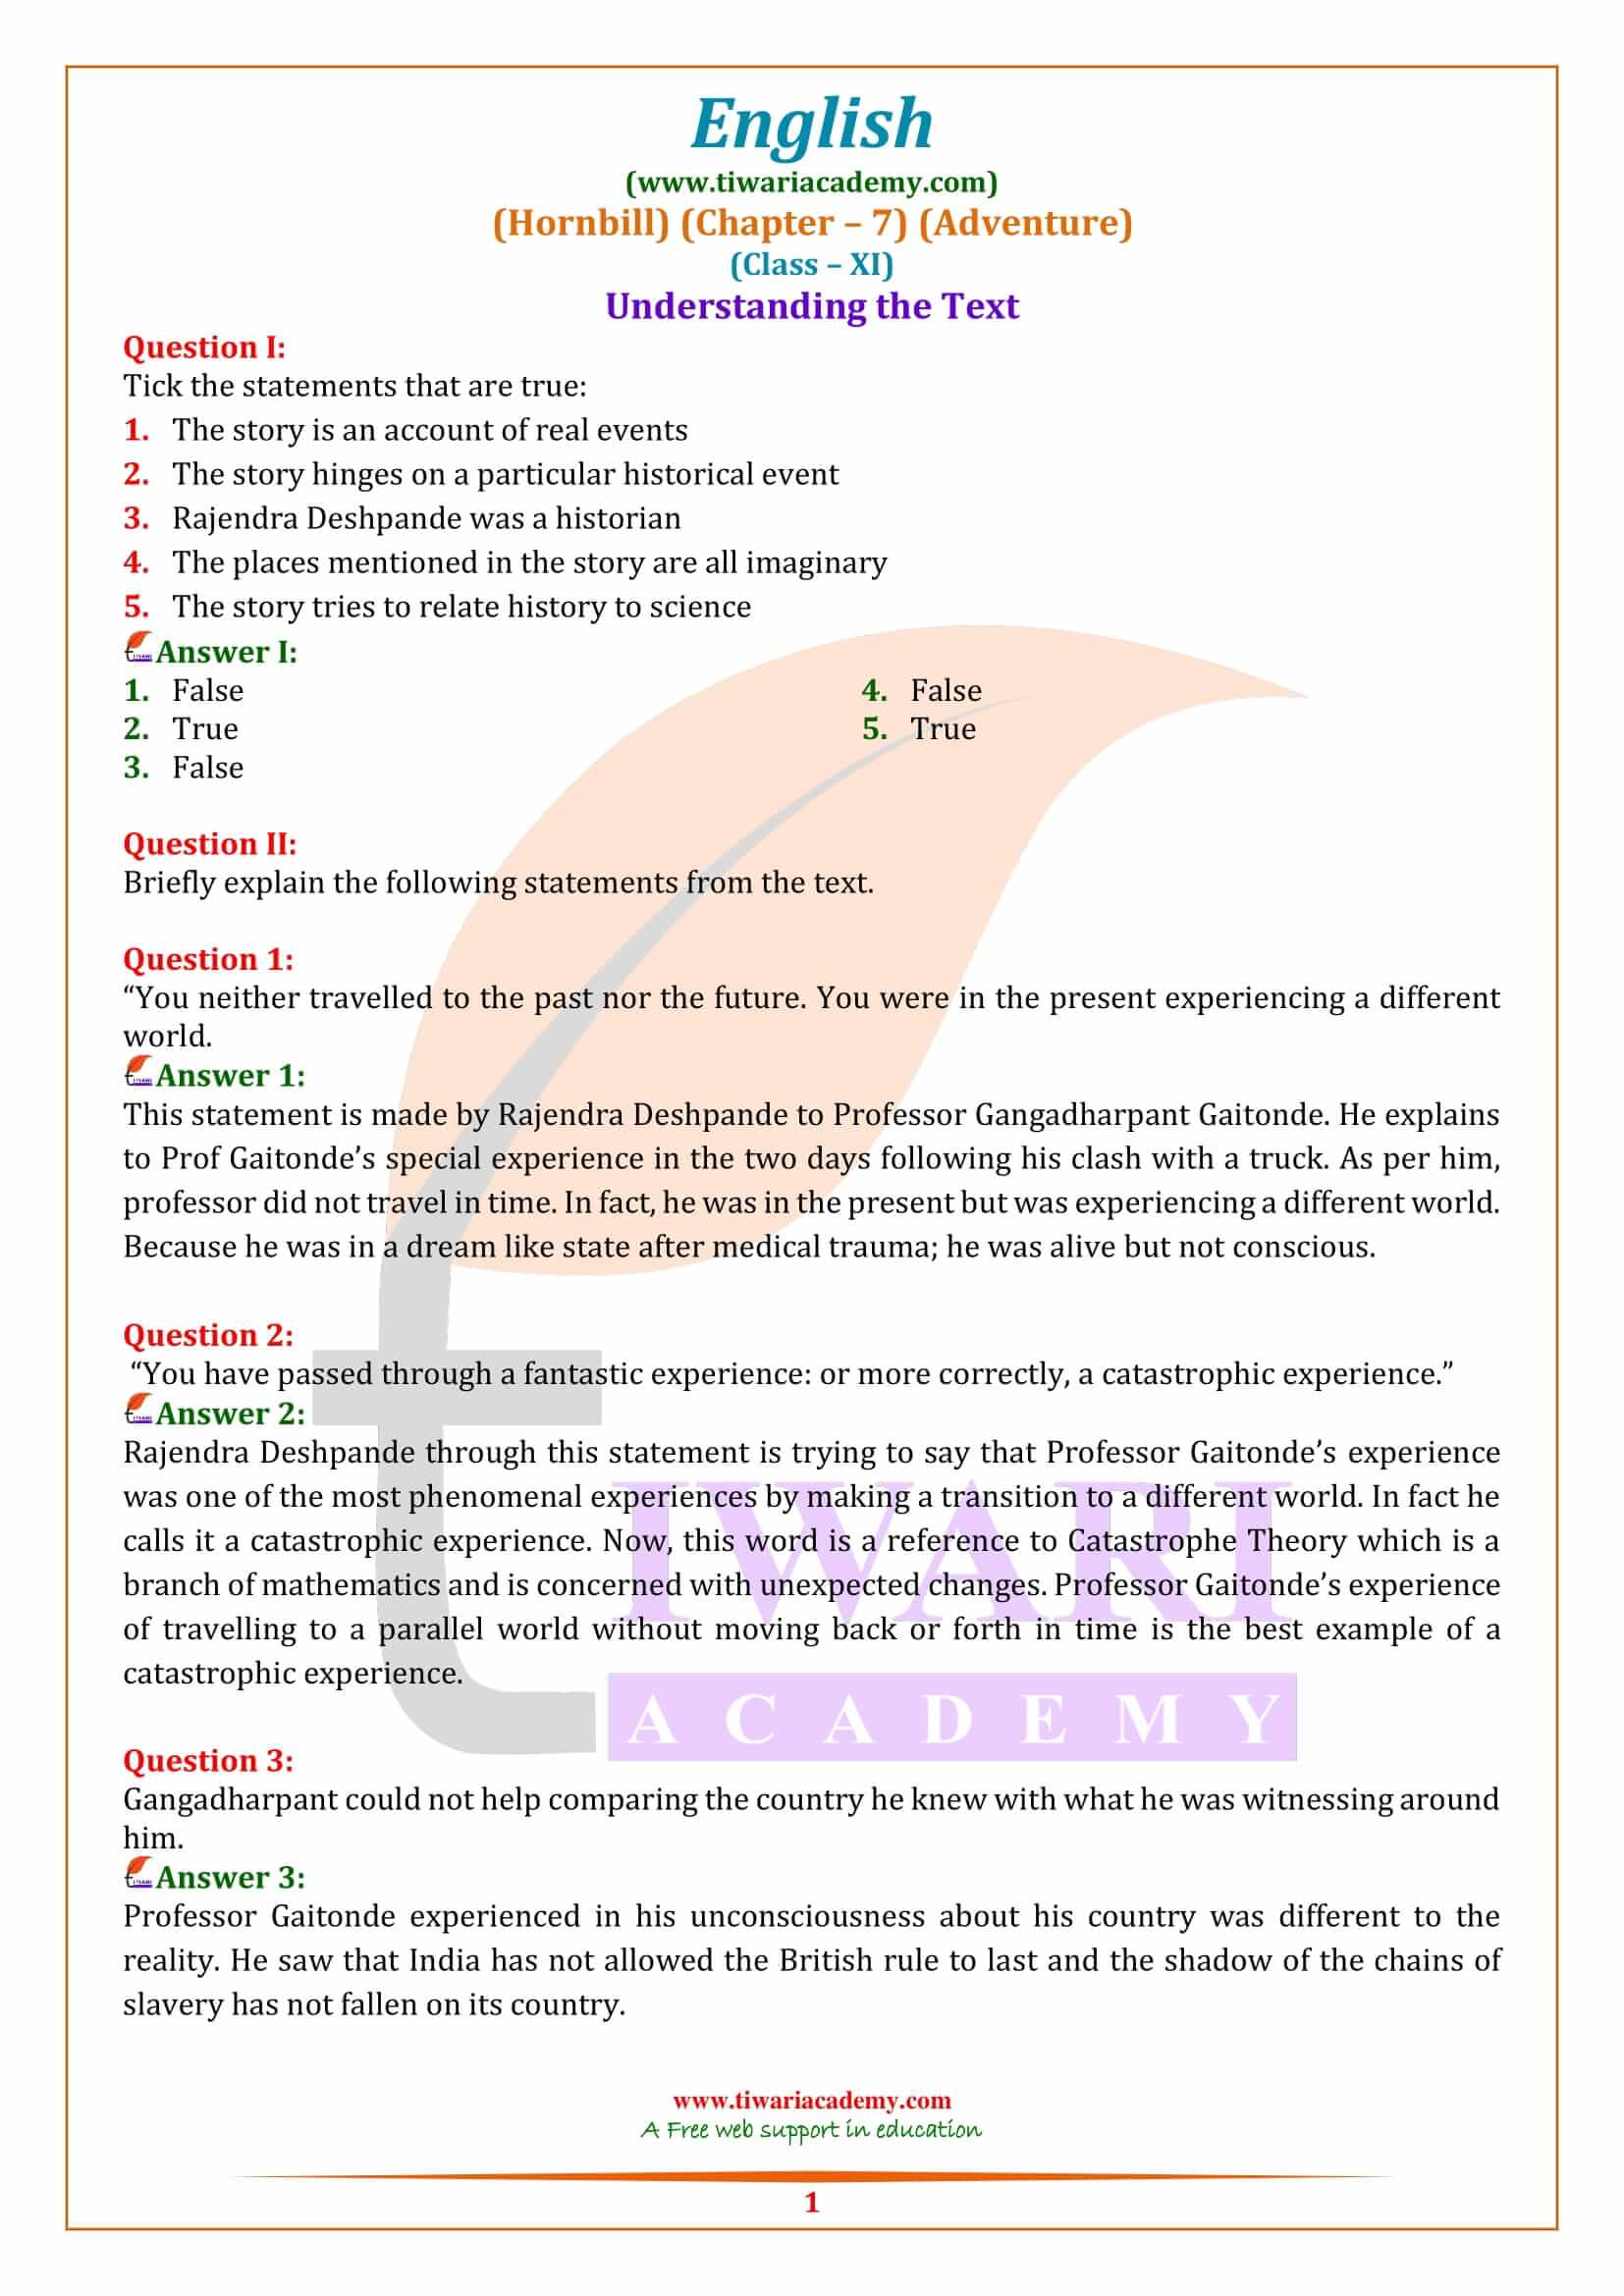 NCERT Solutions for Class 11 English Hornbill Chapter 7 Answers